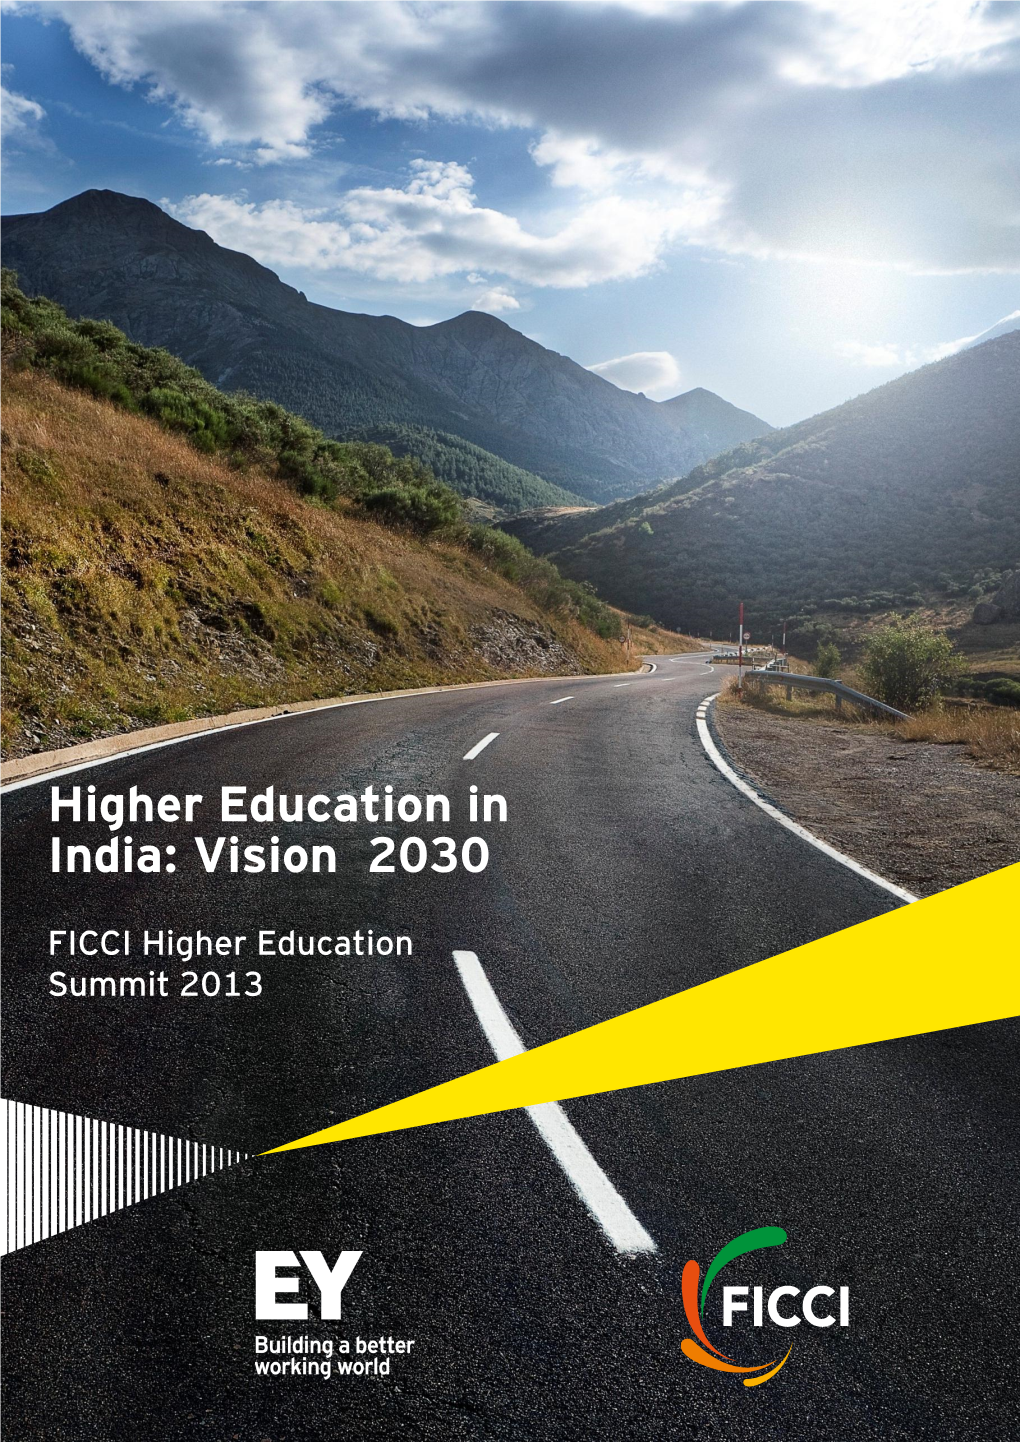 Higher Education in India: Vision 2030